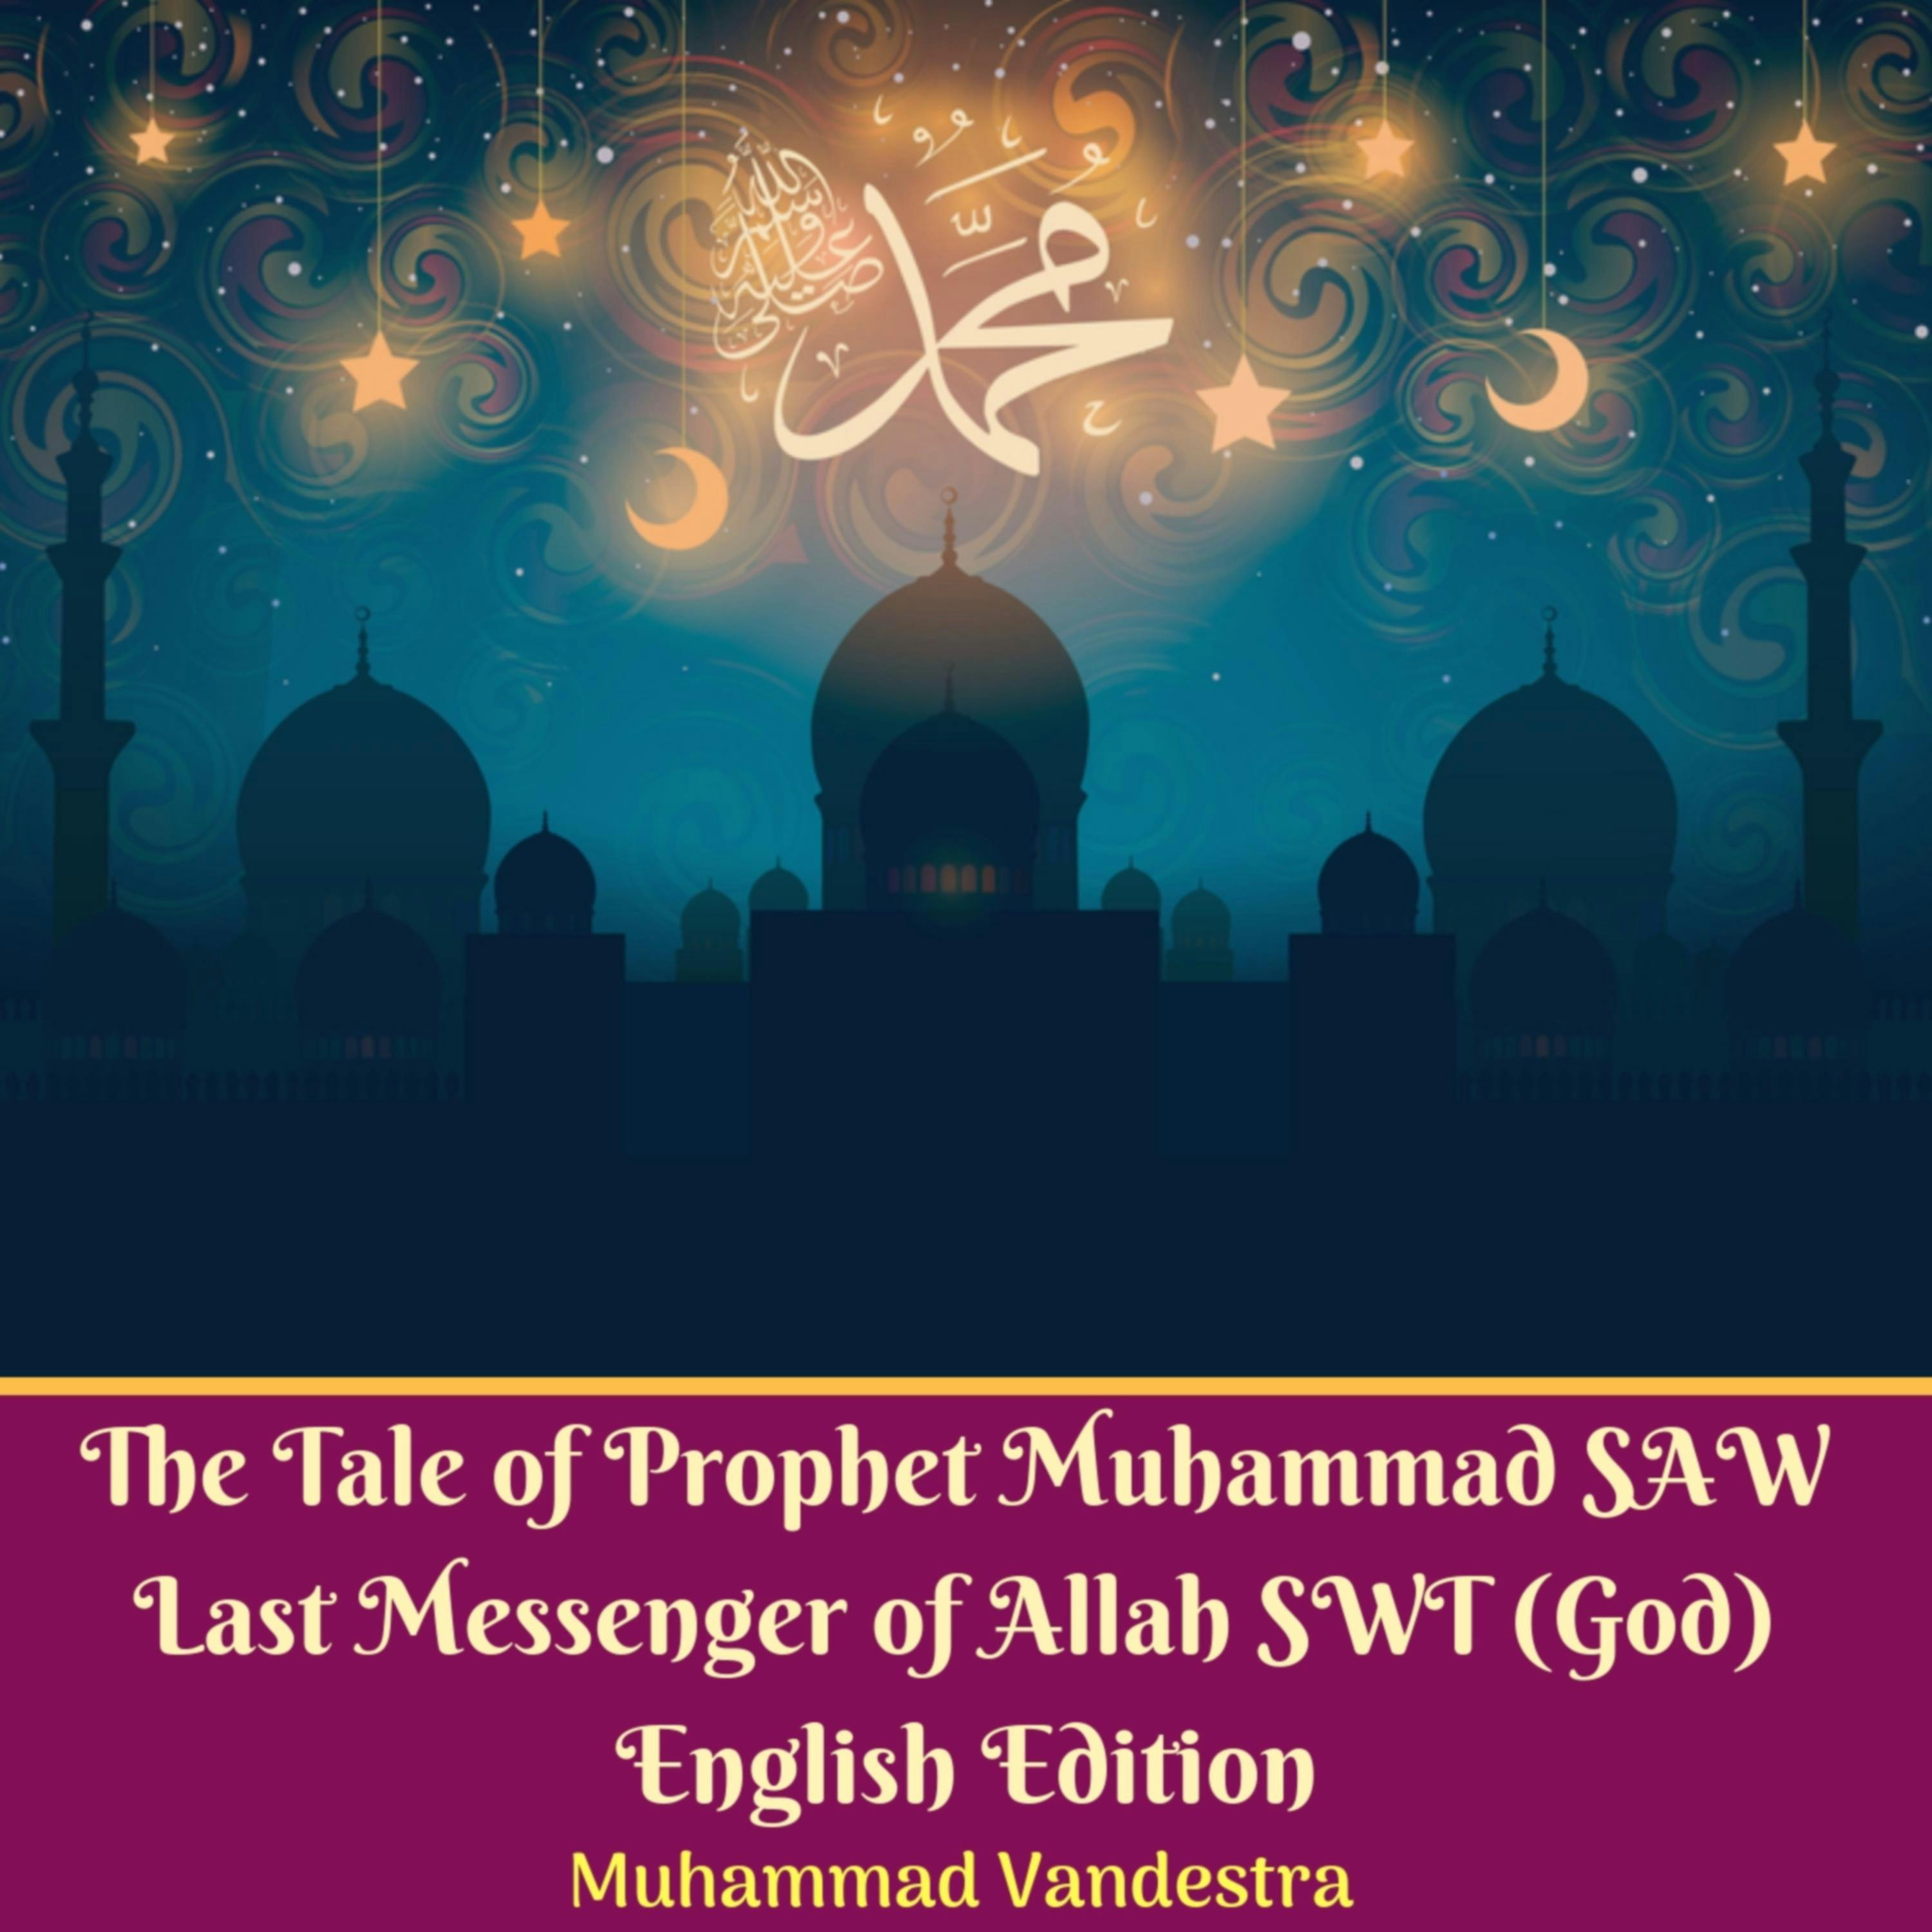 The Tale of Prophet Muhammad SAW Last Messenger of Allah SWT (God) English Edition - Muhammad Vandestra